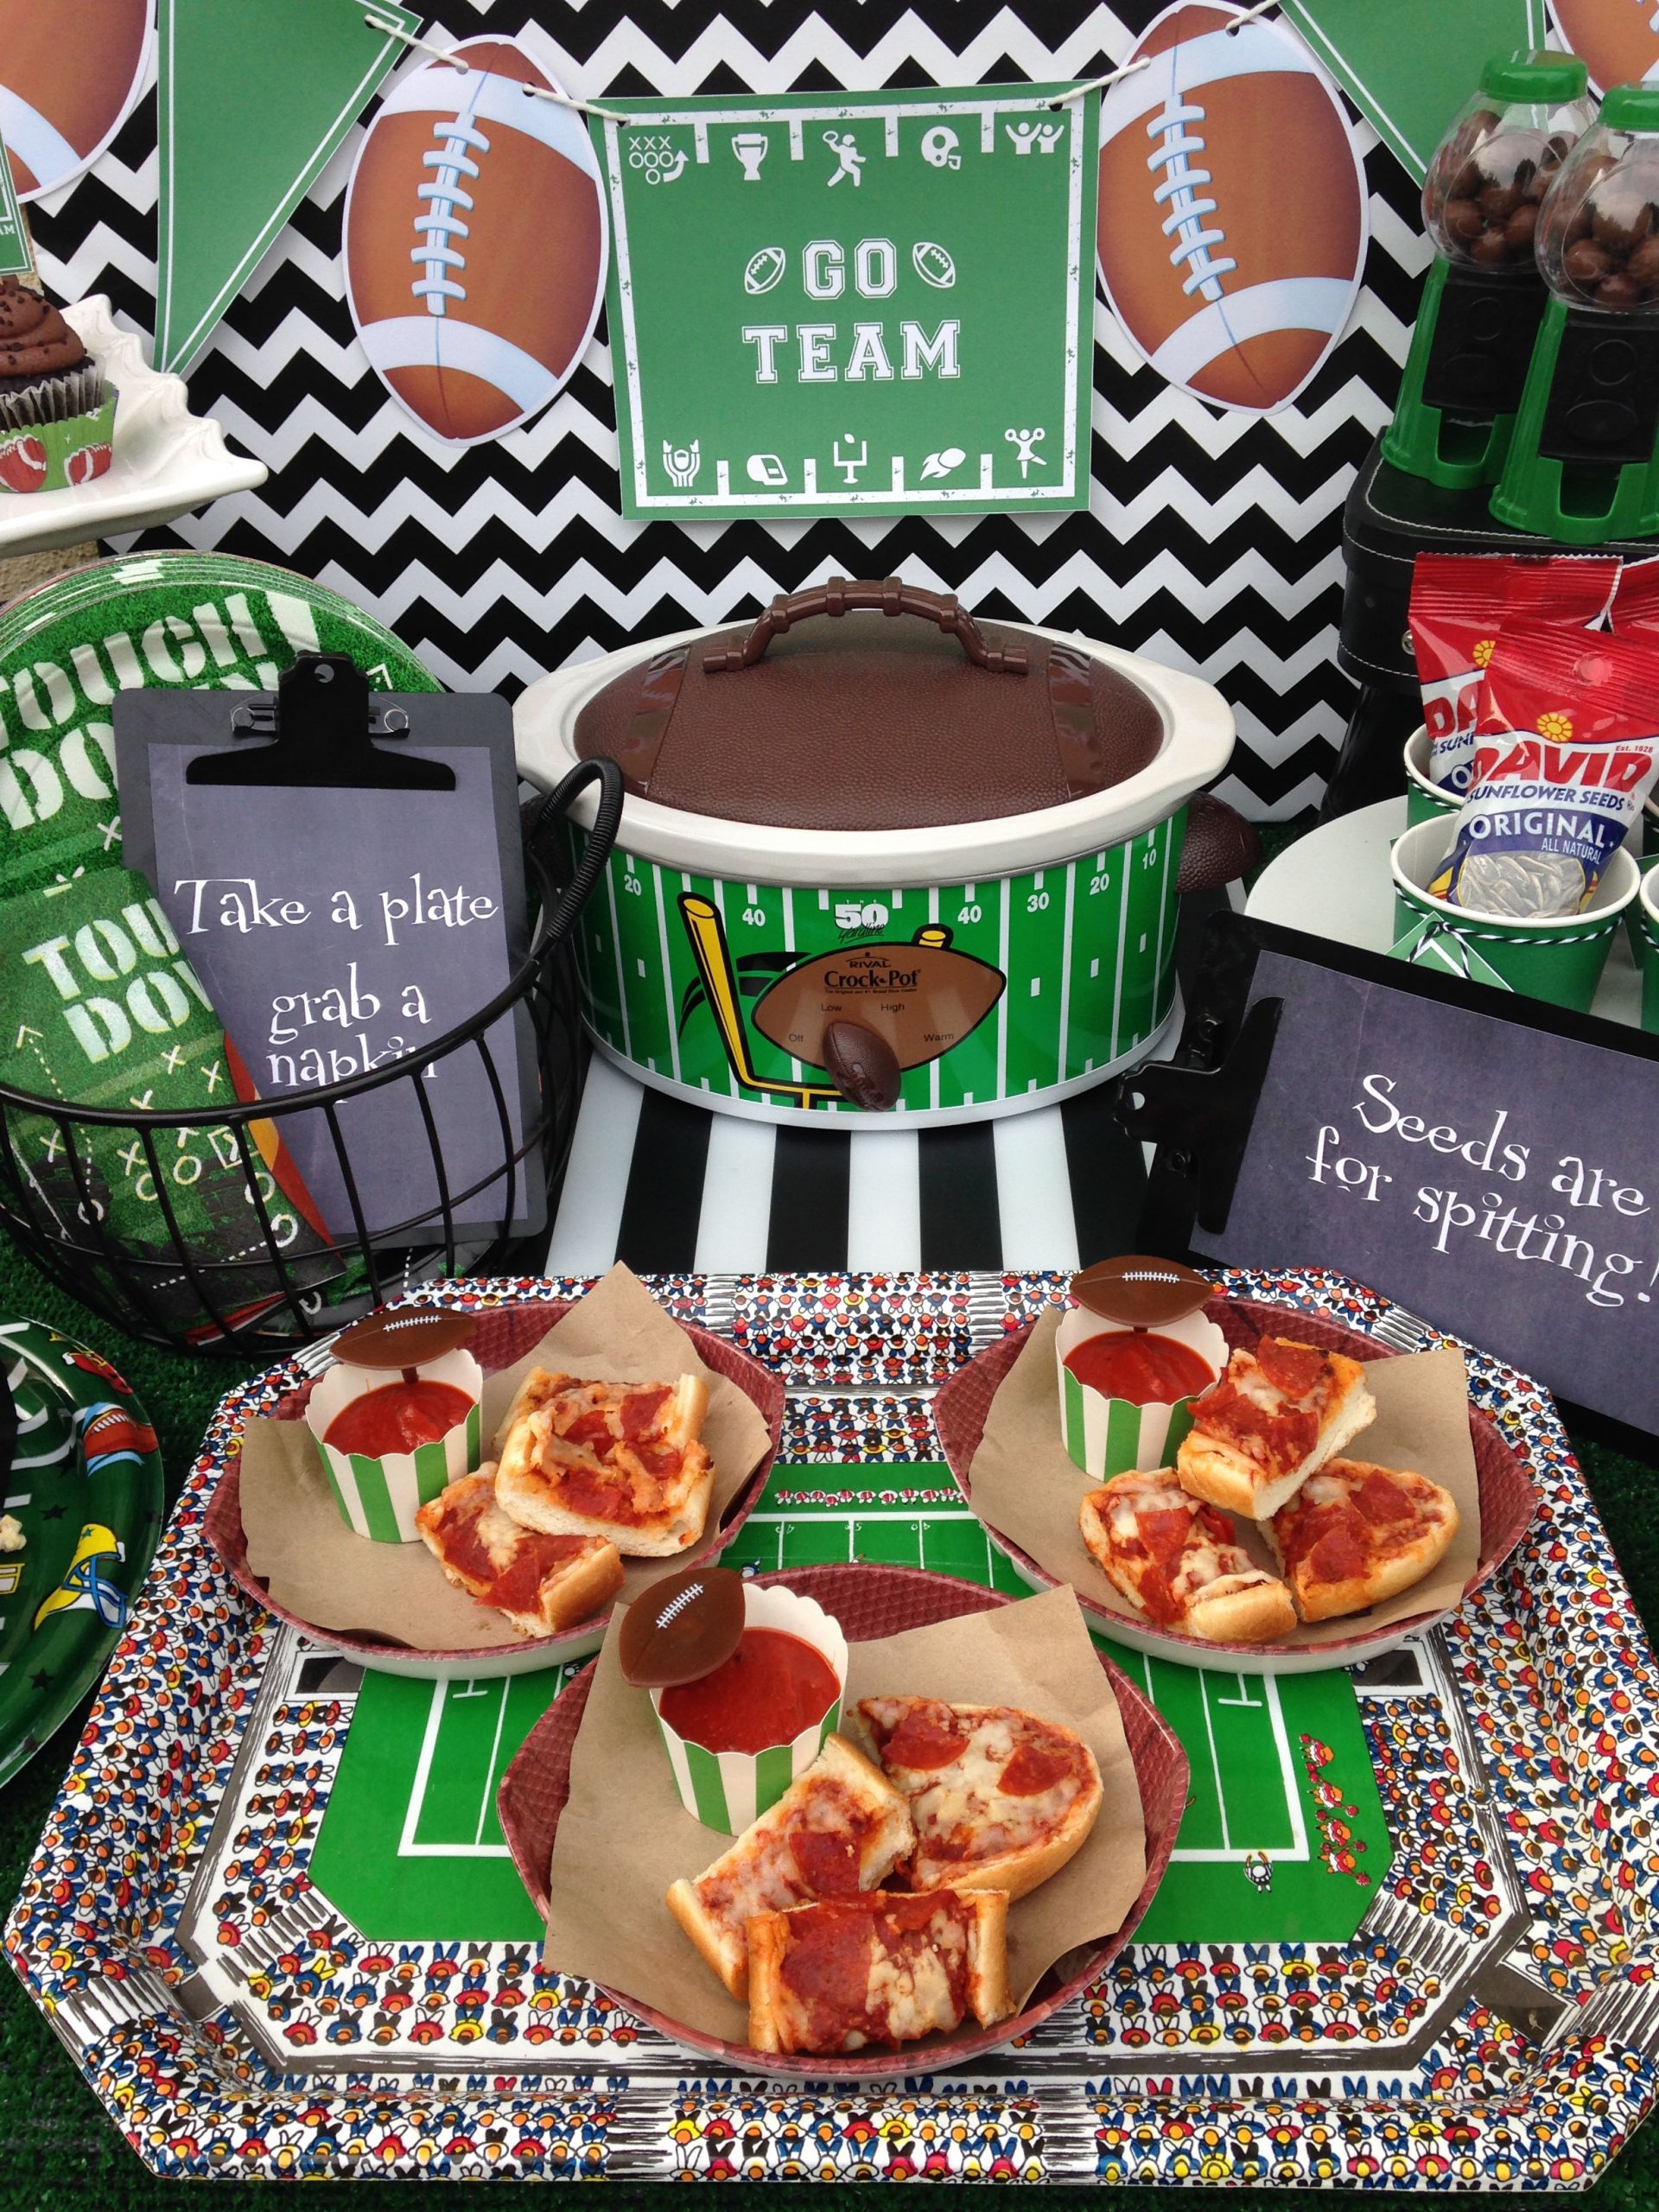 Football Party Ideas Food
 5 Easy Game Day Party Ideas on a Bud